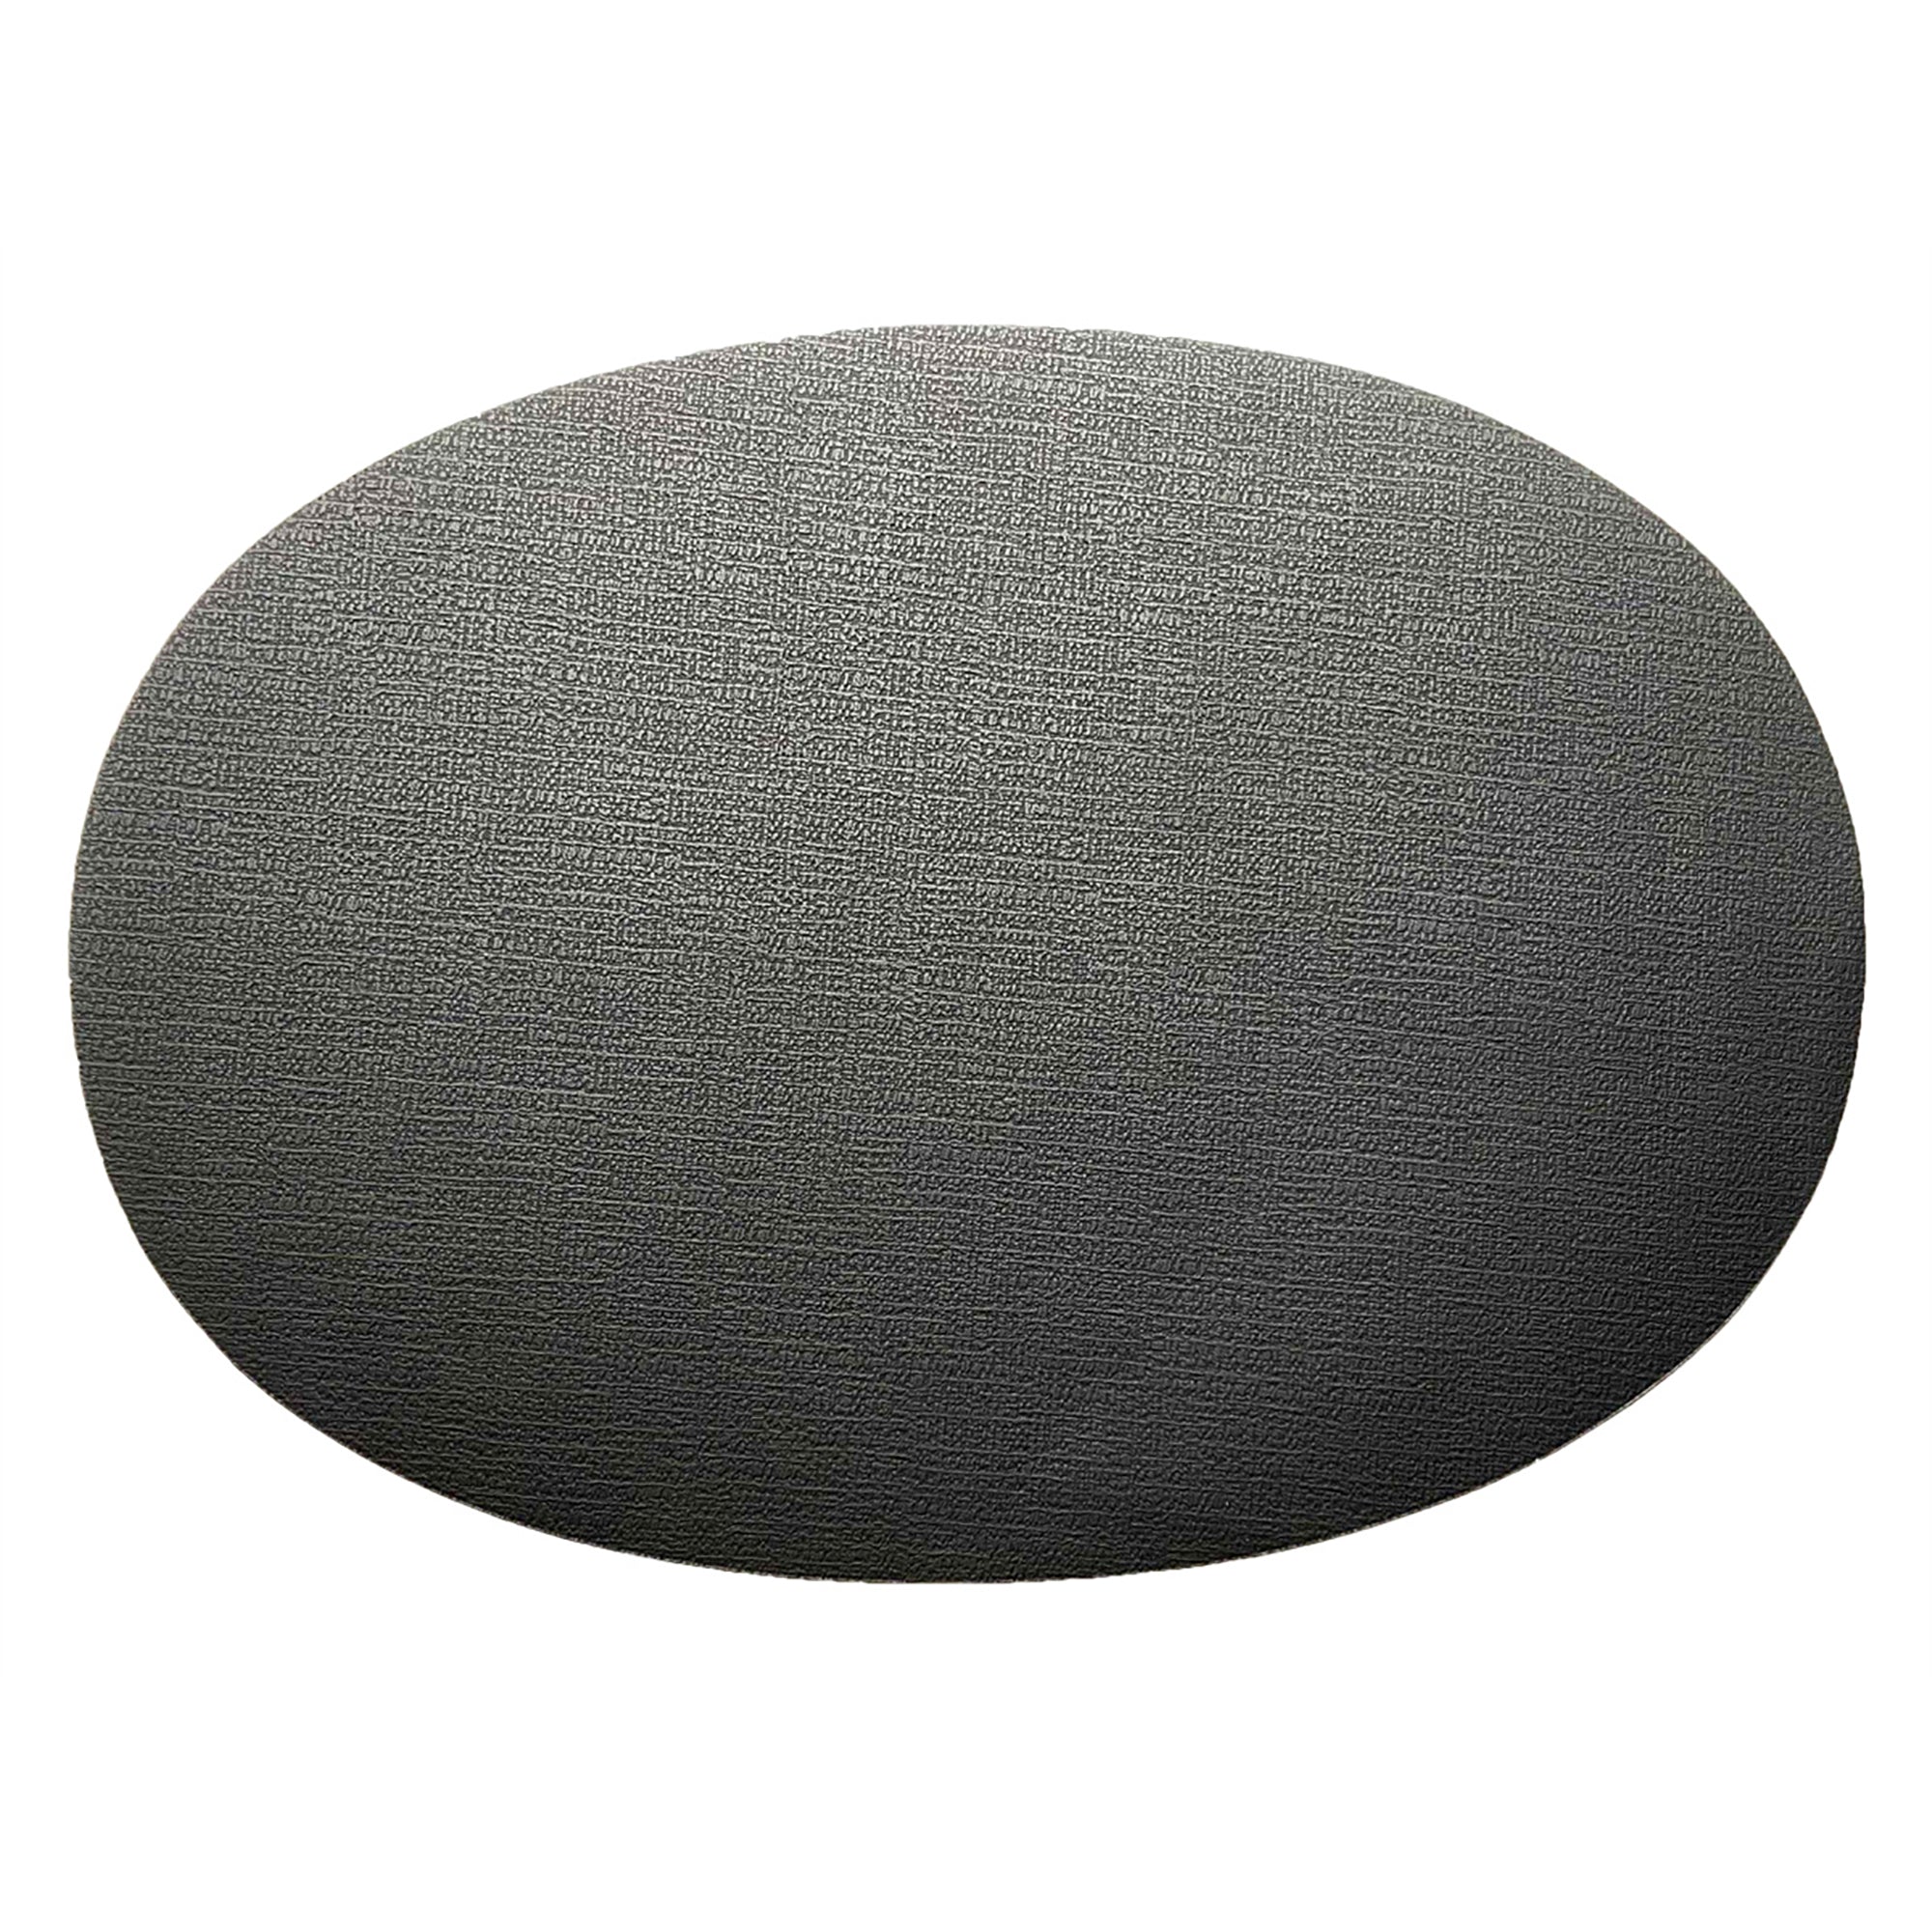 Heavy Suede Look Oval Black Placemat 17x12in